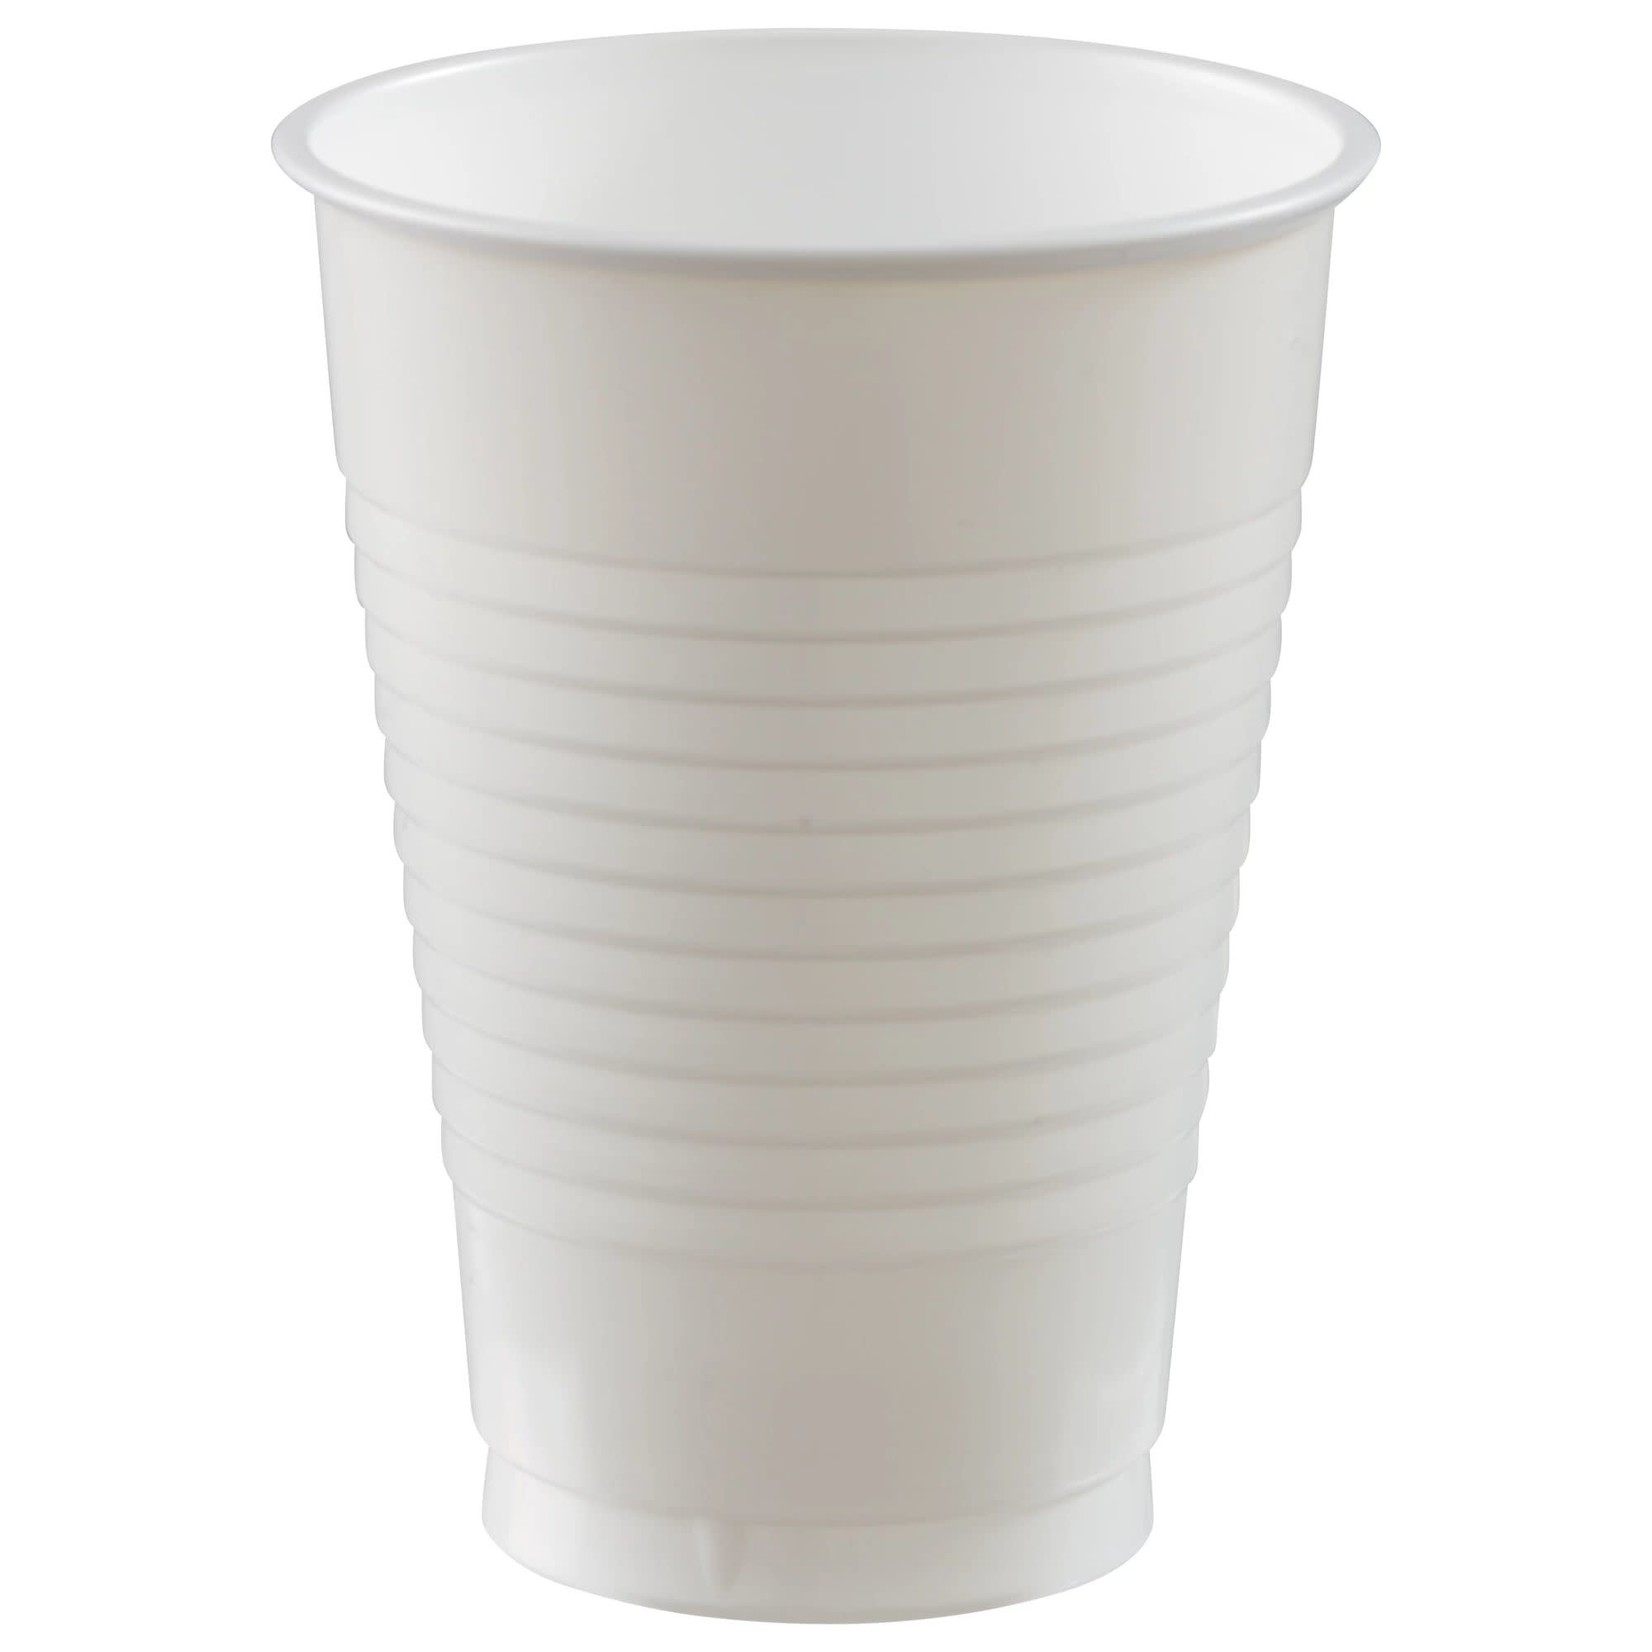 12 oz. Plastic Cups, High Ct. - Frosty White